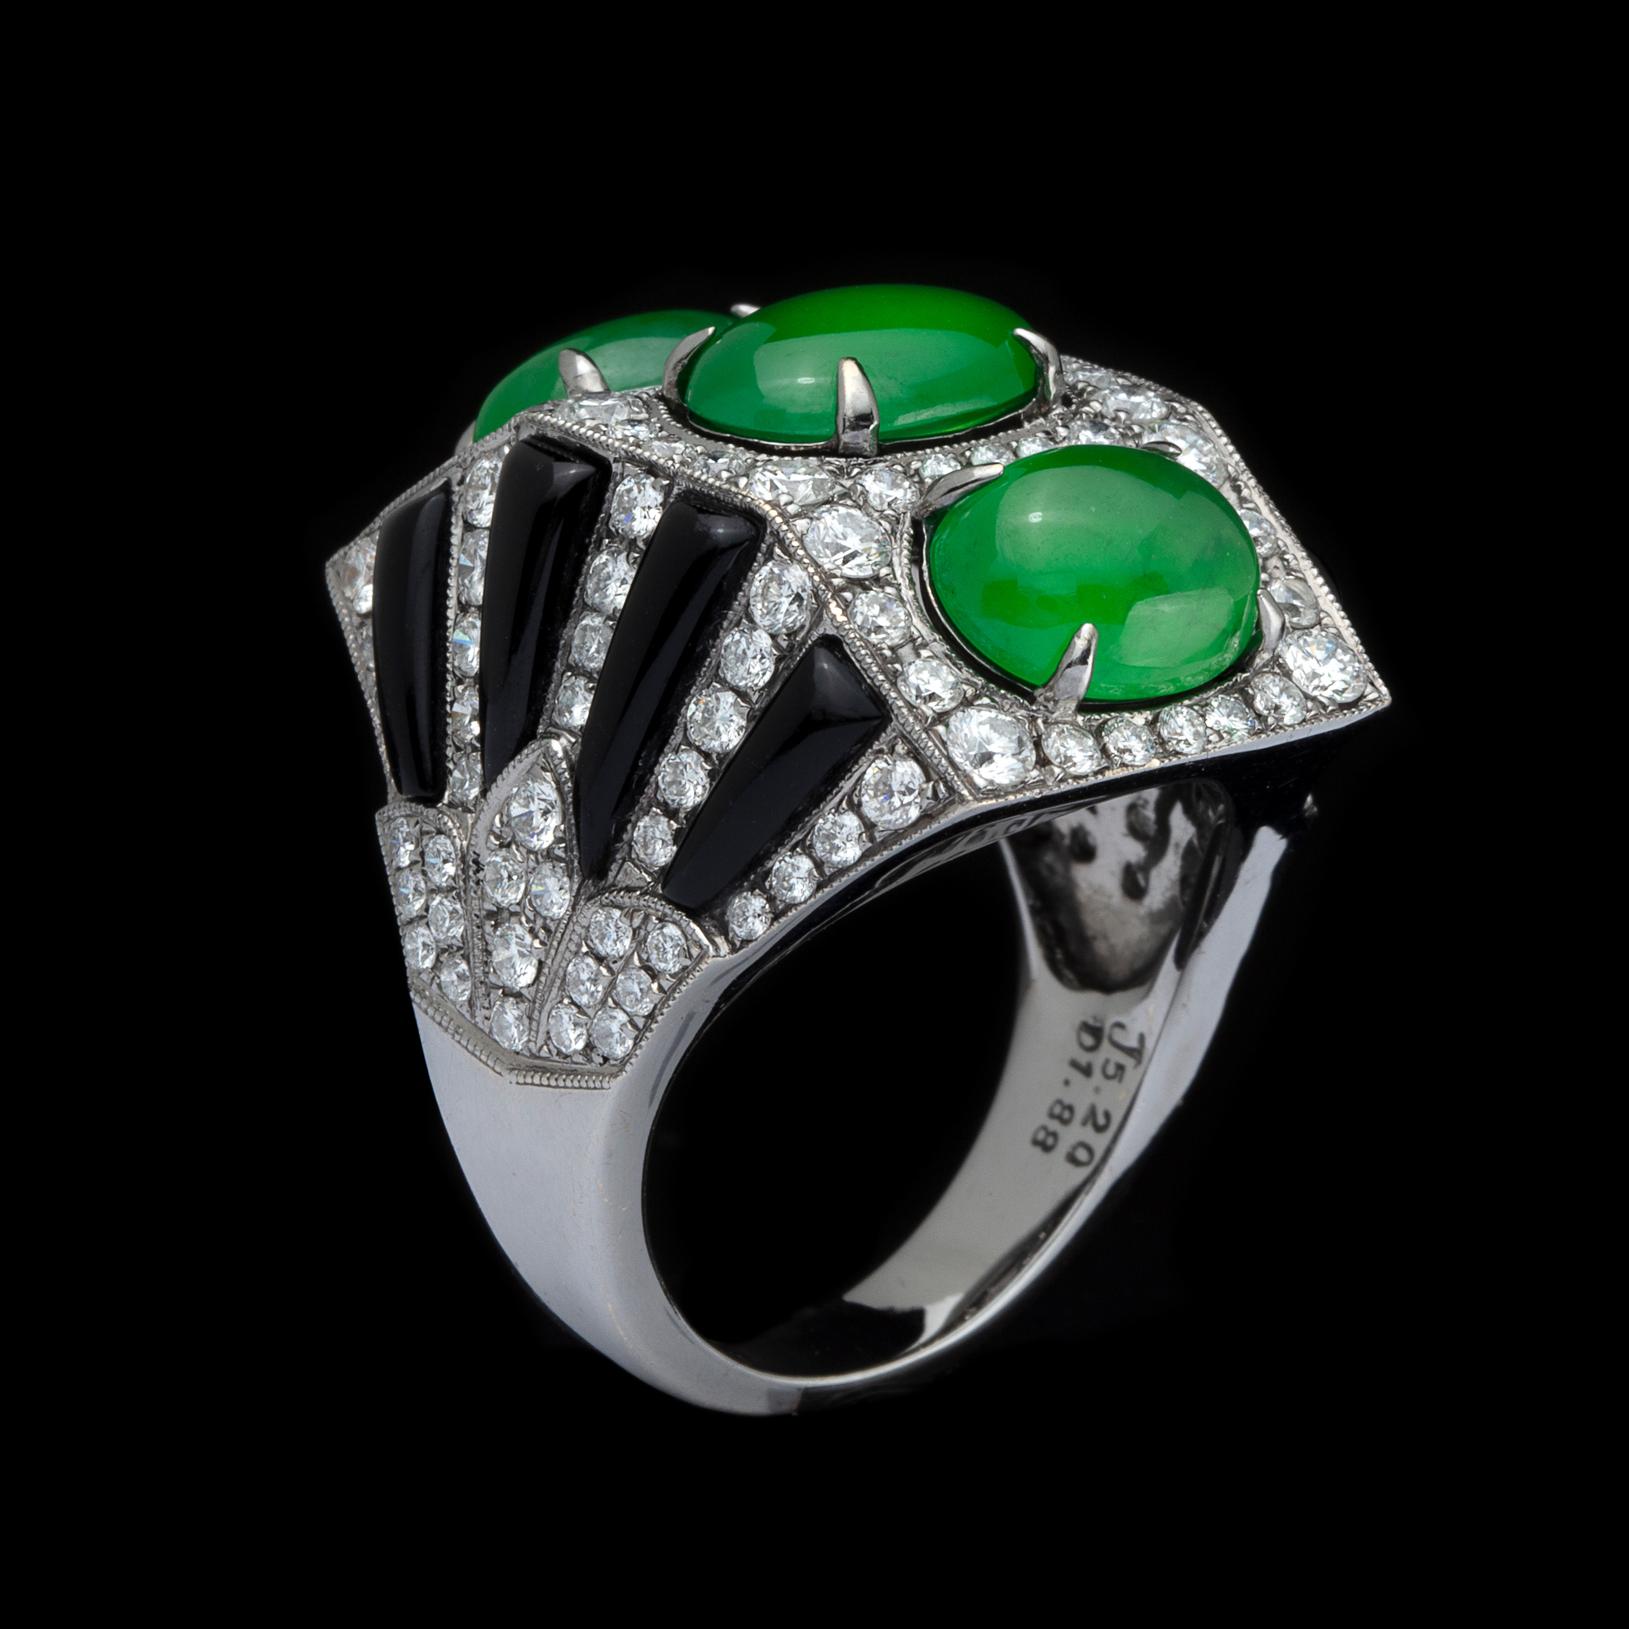 Exclusive New York-based Taiwanese jeweler Anna Hu created this amazing ring. The fan-shaped 18k white gold ring is designed with 3 oval-shaped jadeite jade cabochons, weighing together 5.20 carats, and accented with black onyx and round